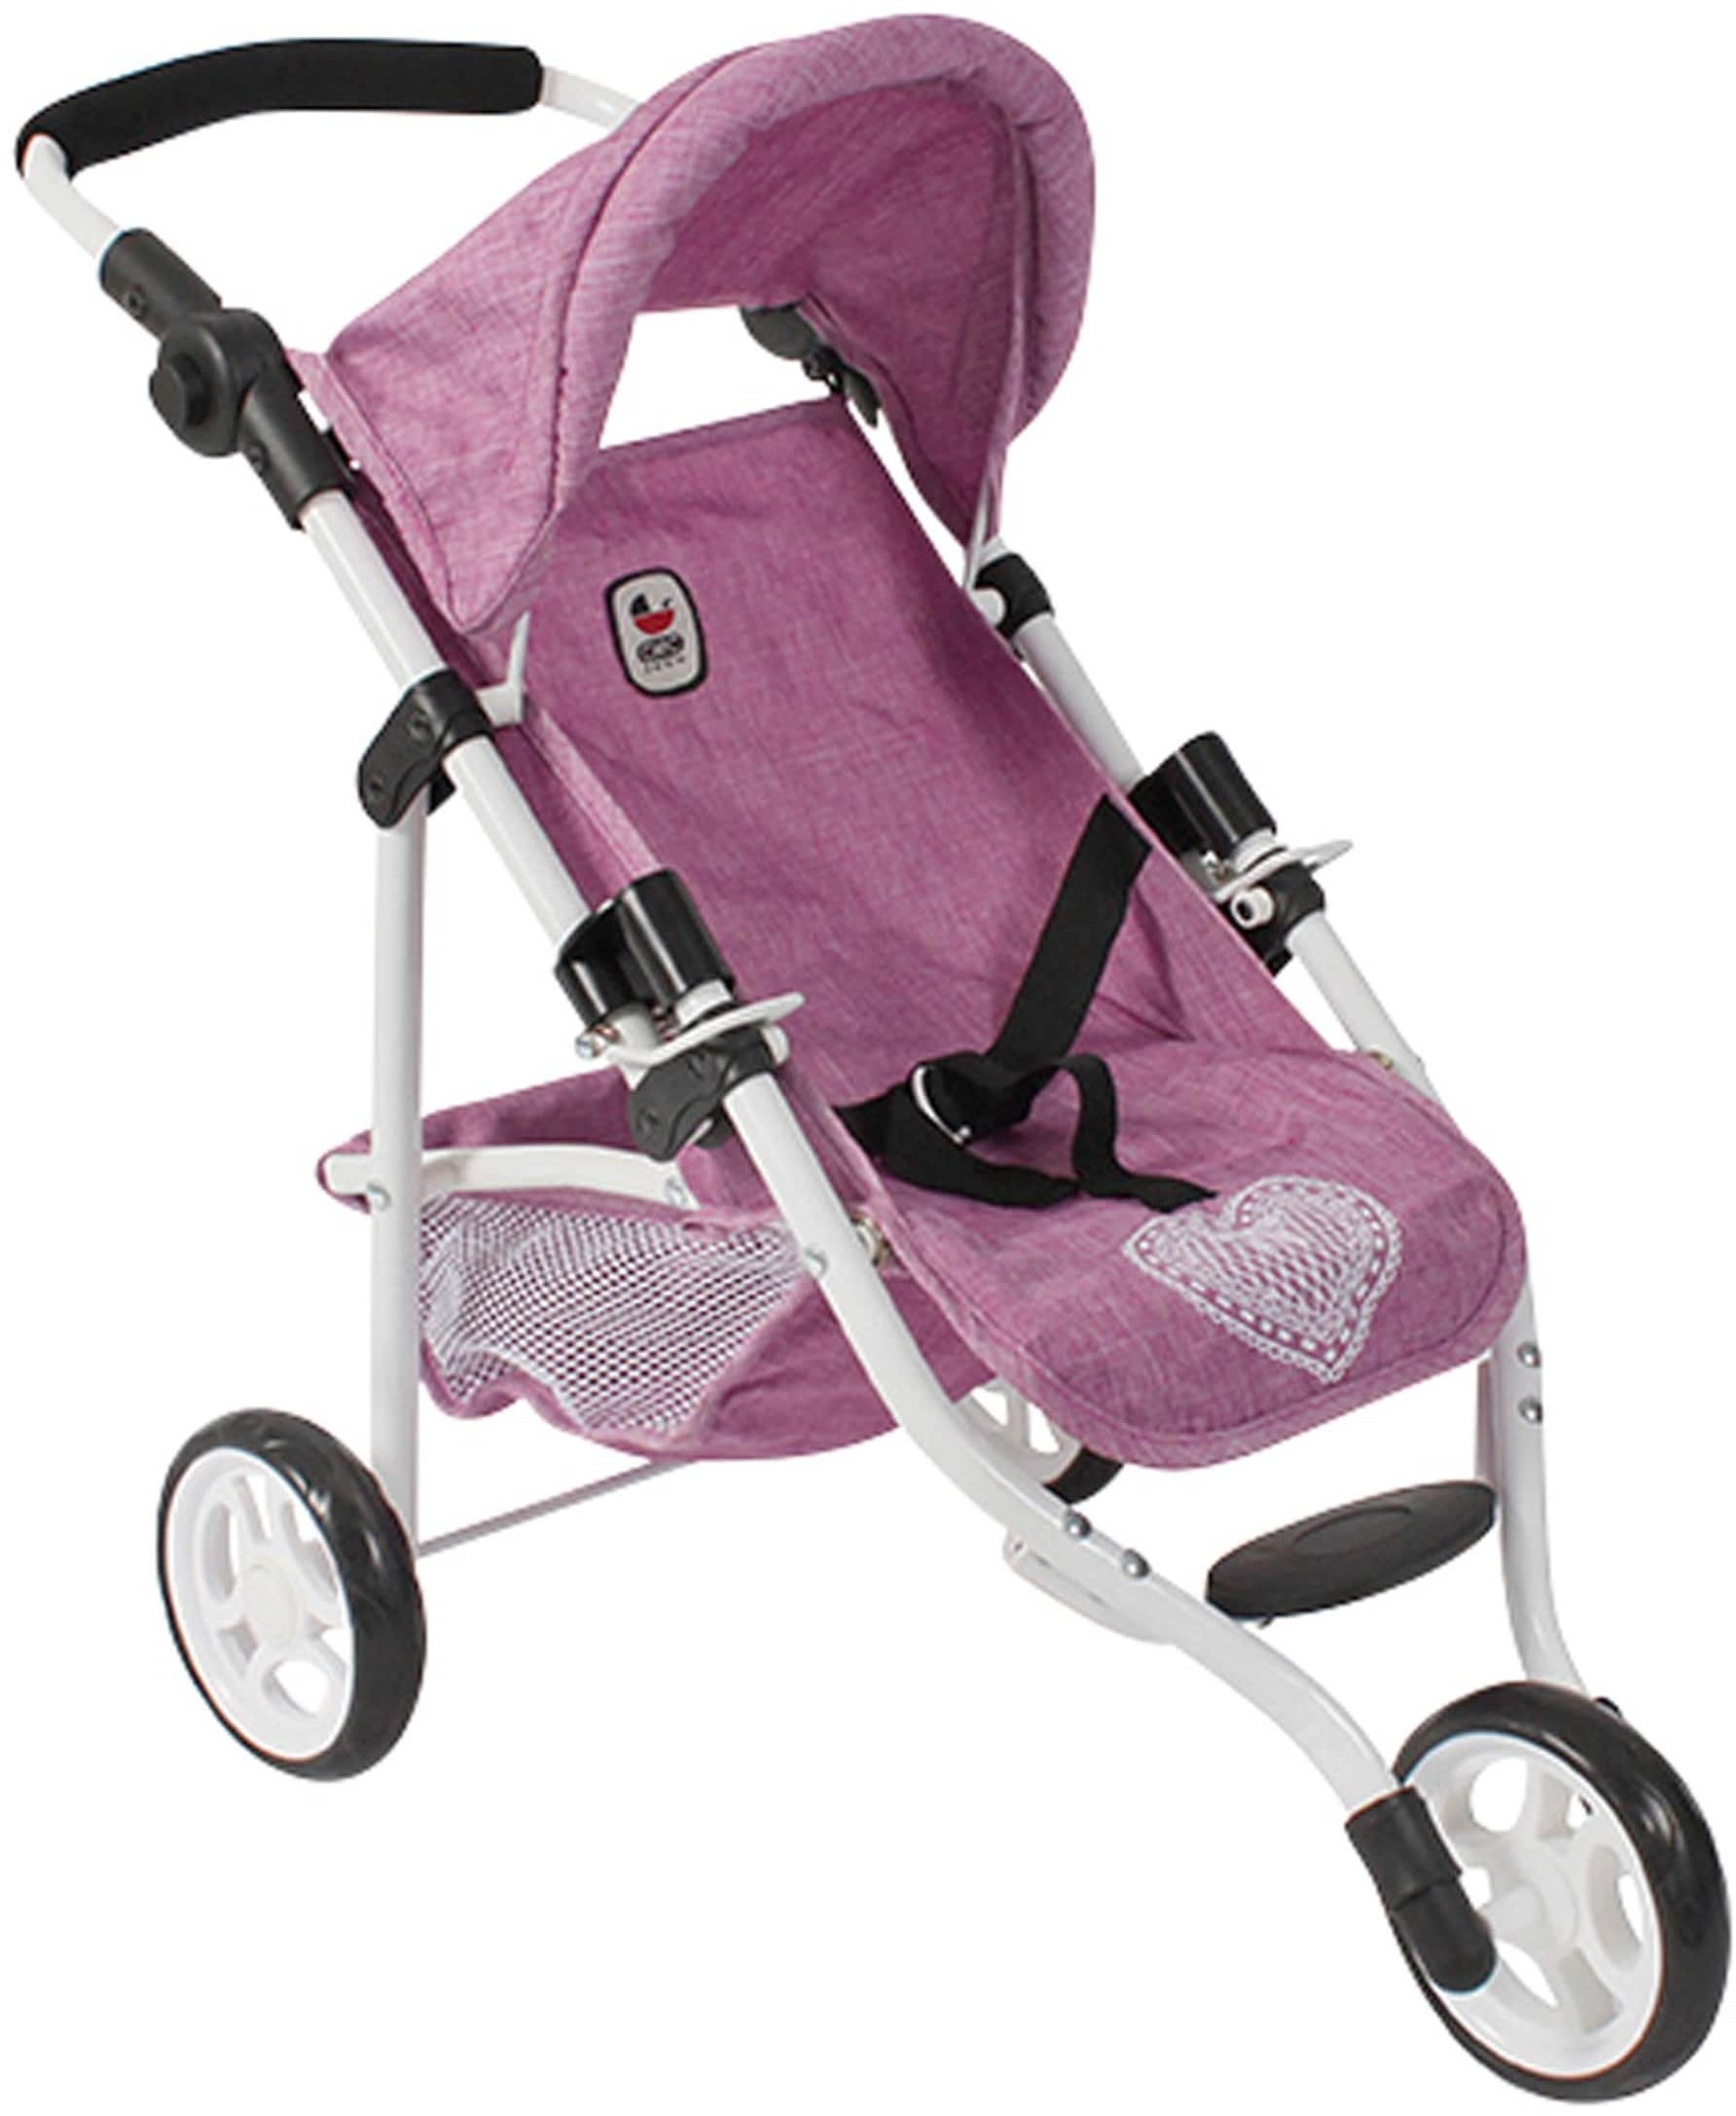 Bayer Chic Puppen-Jogging-Buggy Lola, pink